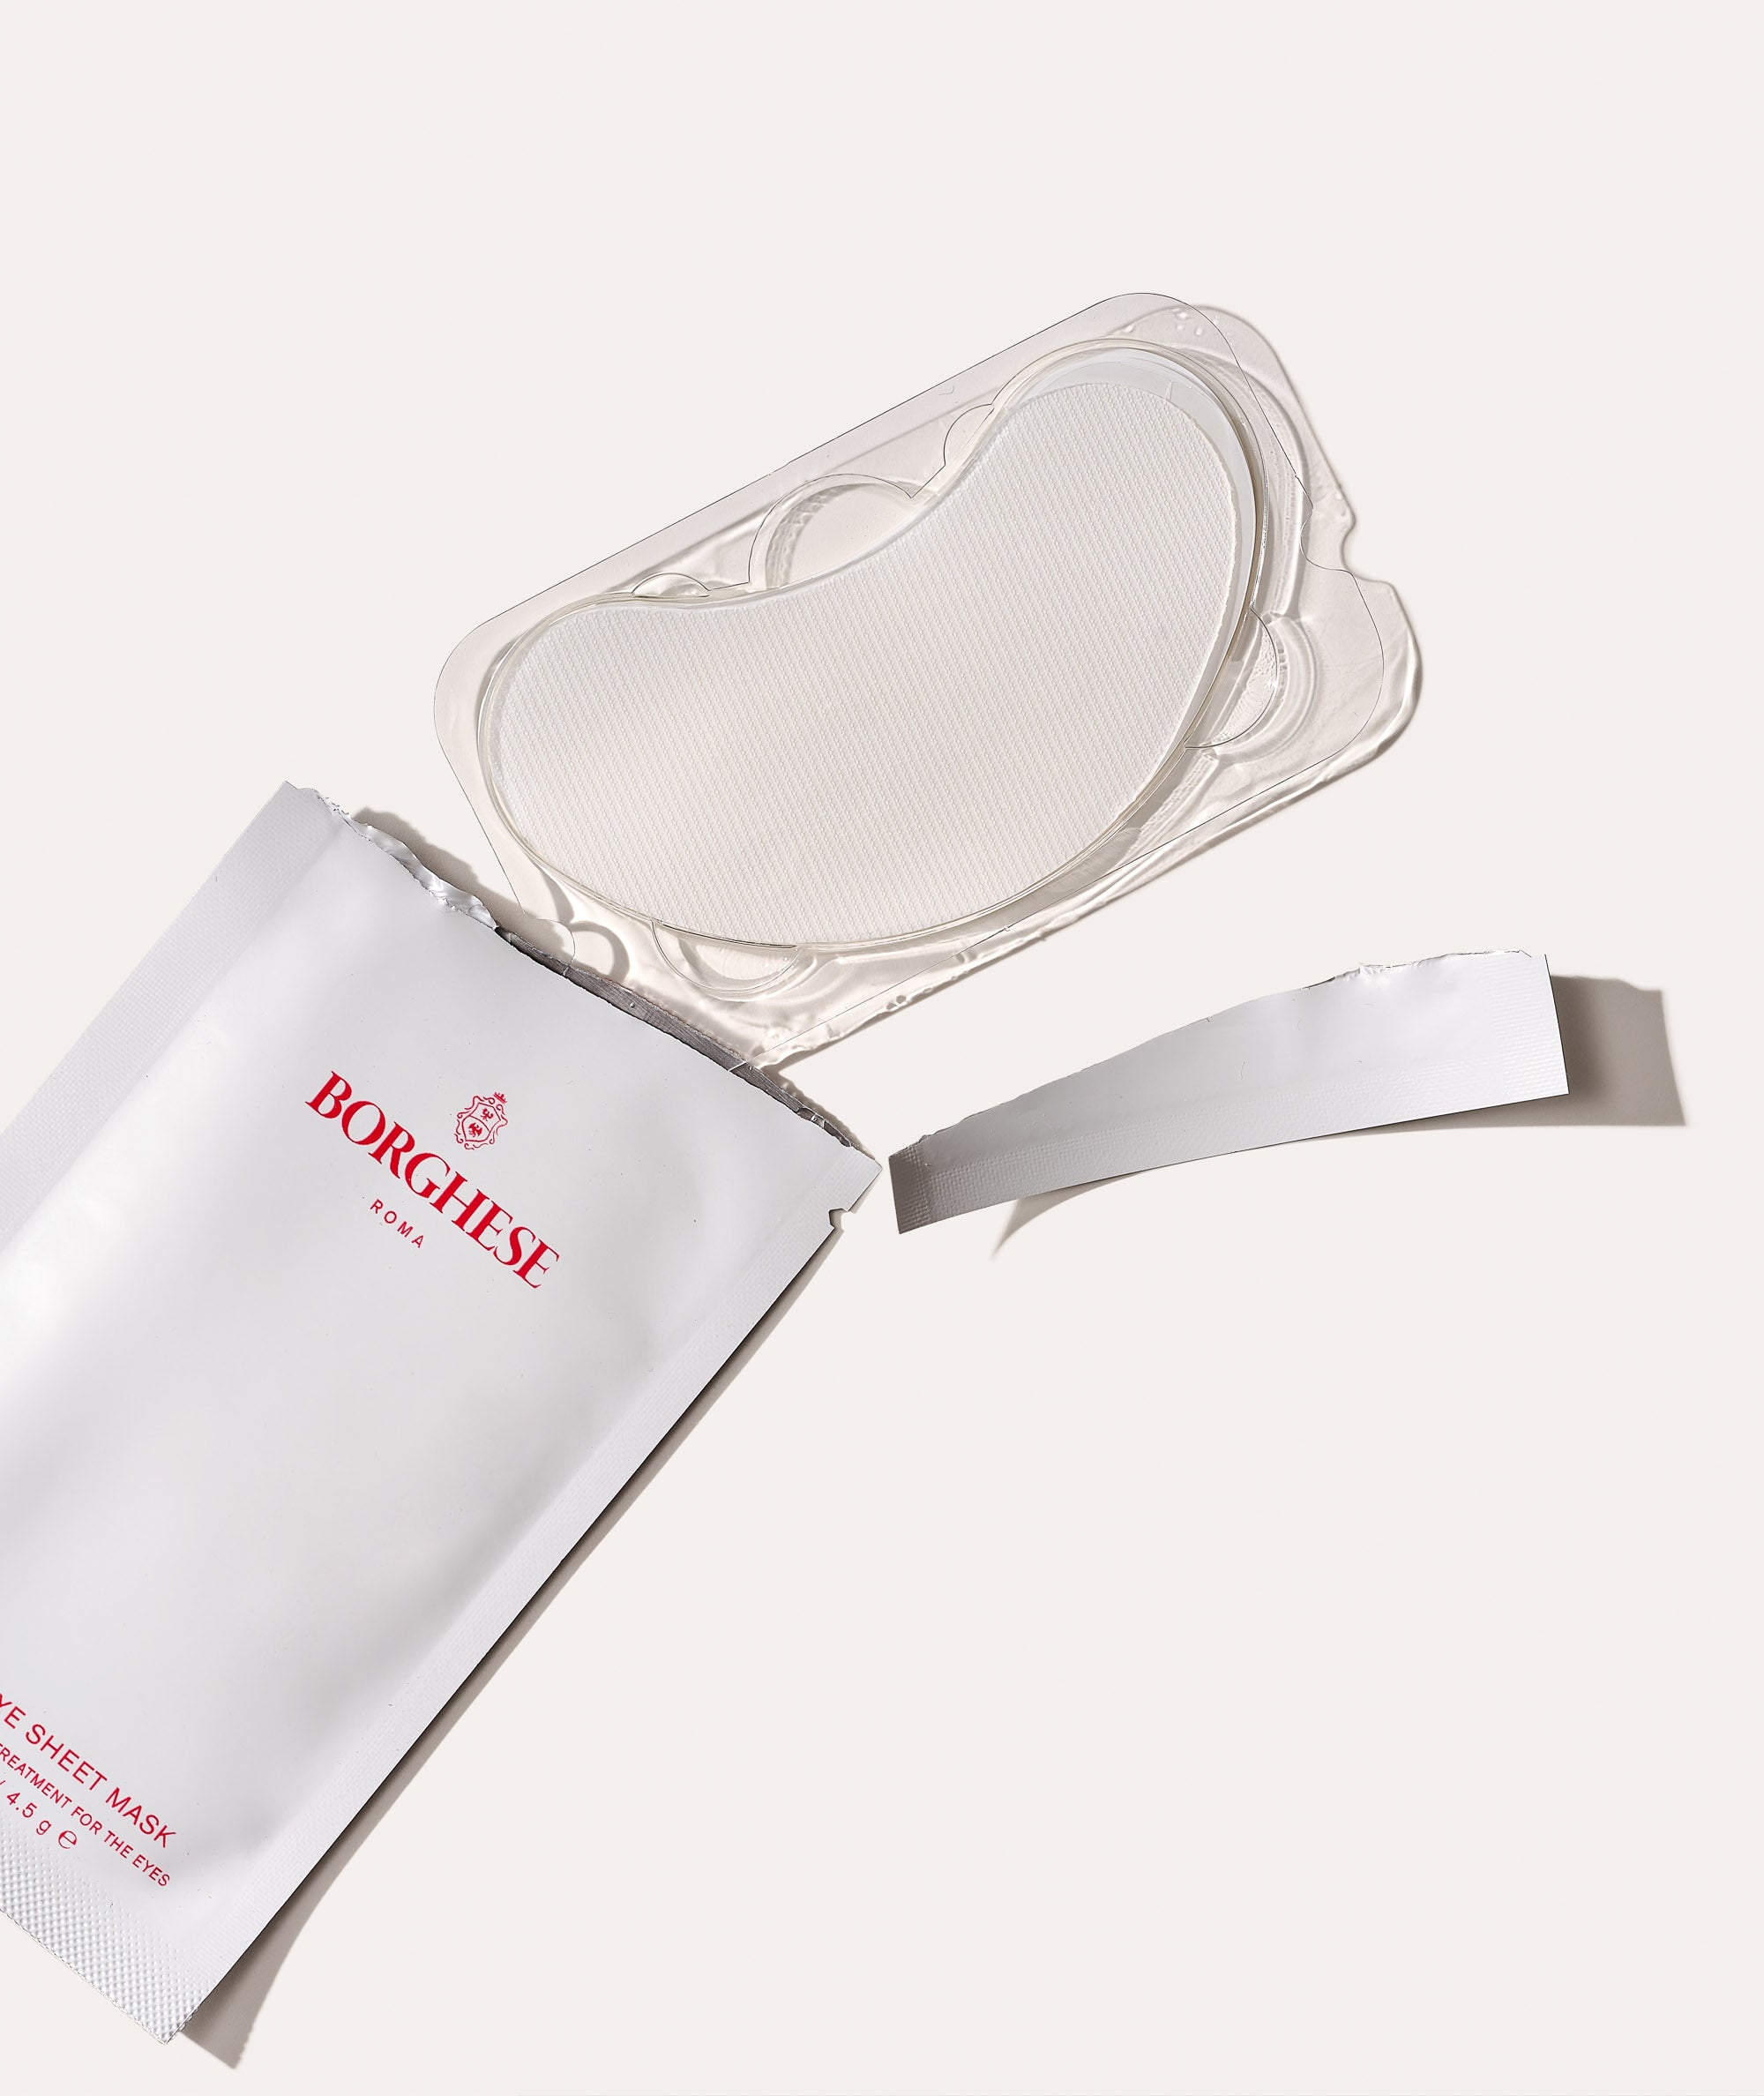 This is a picture of the Borghese Restorative Eye Sheet Mask outside of packette